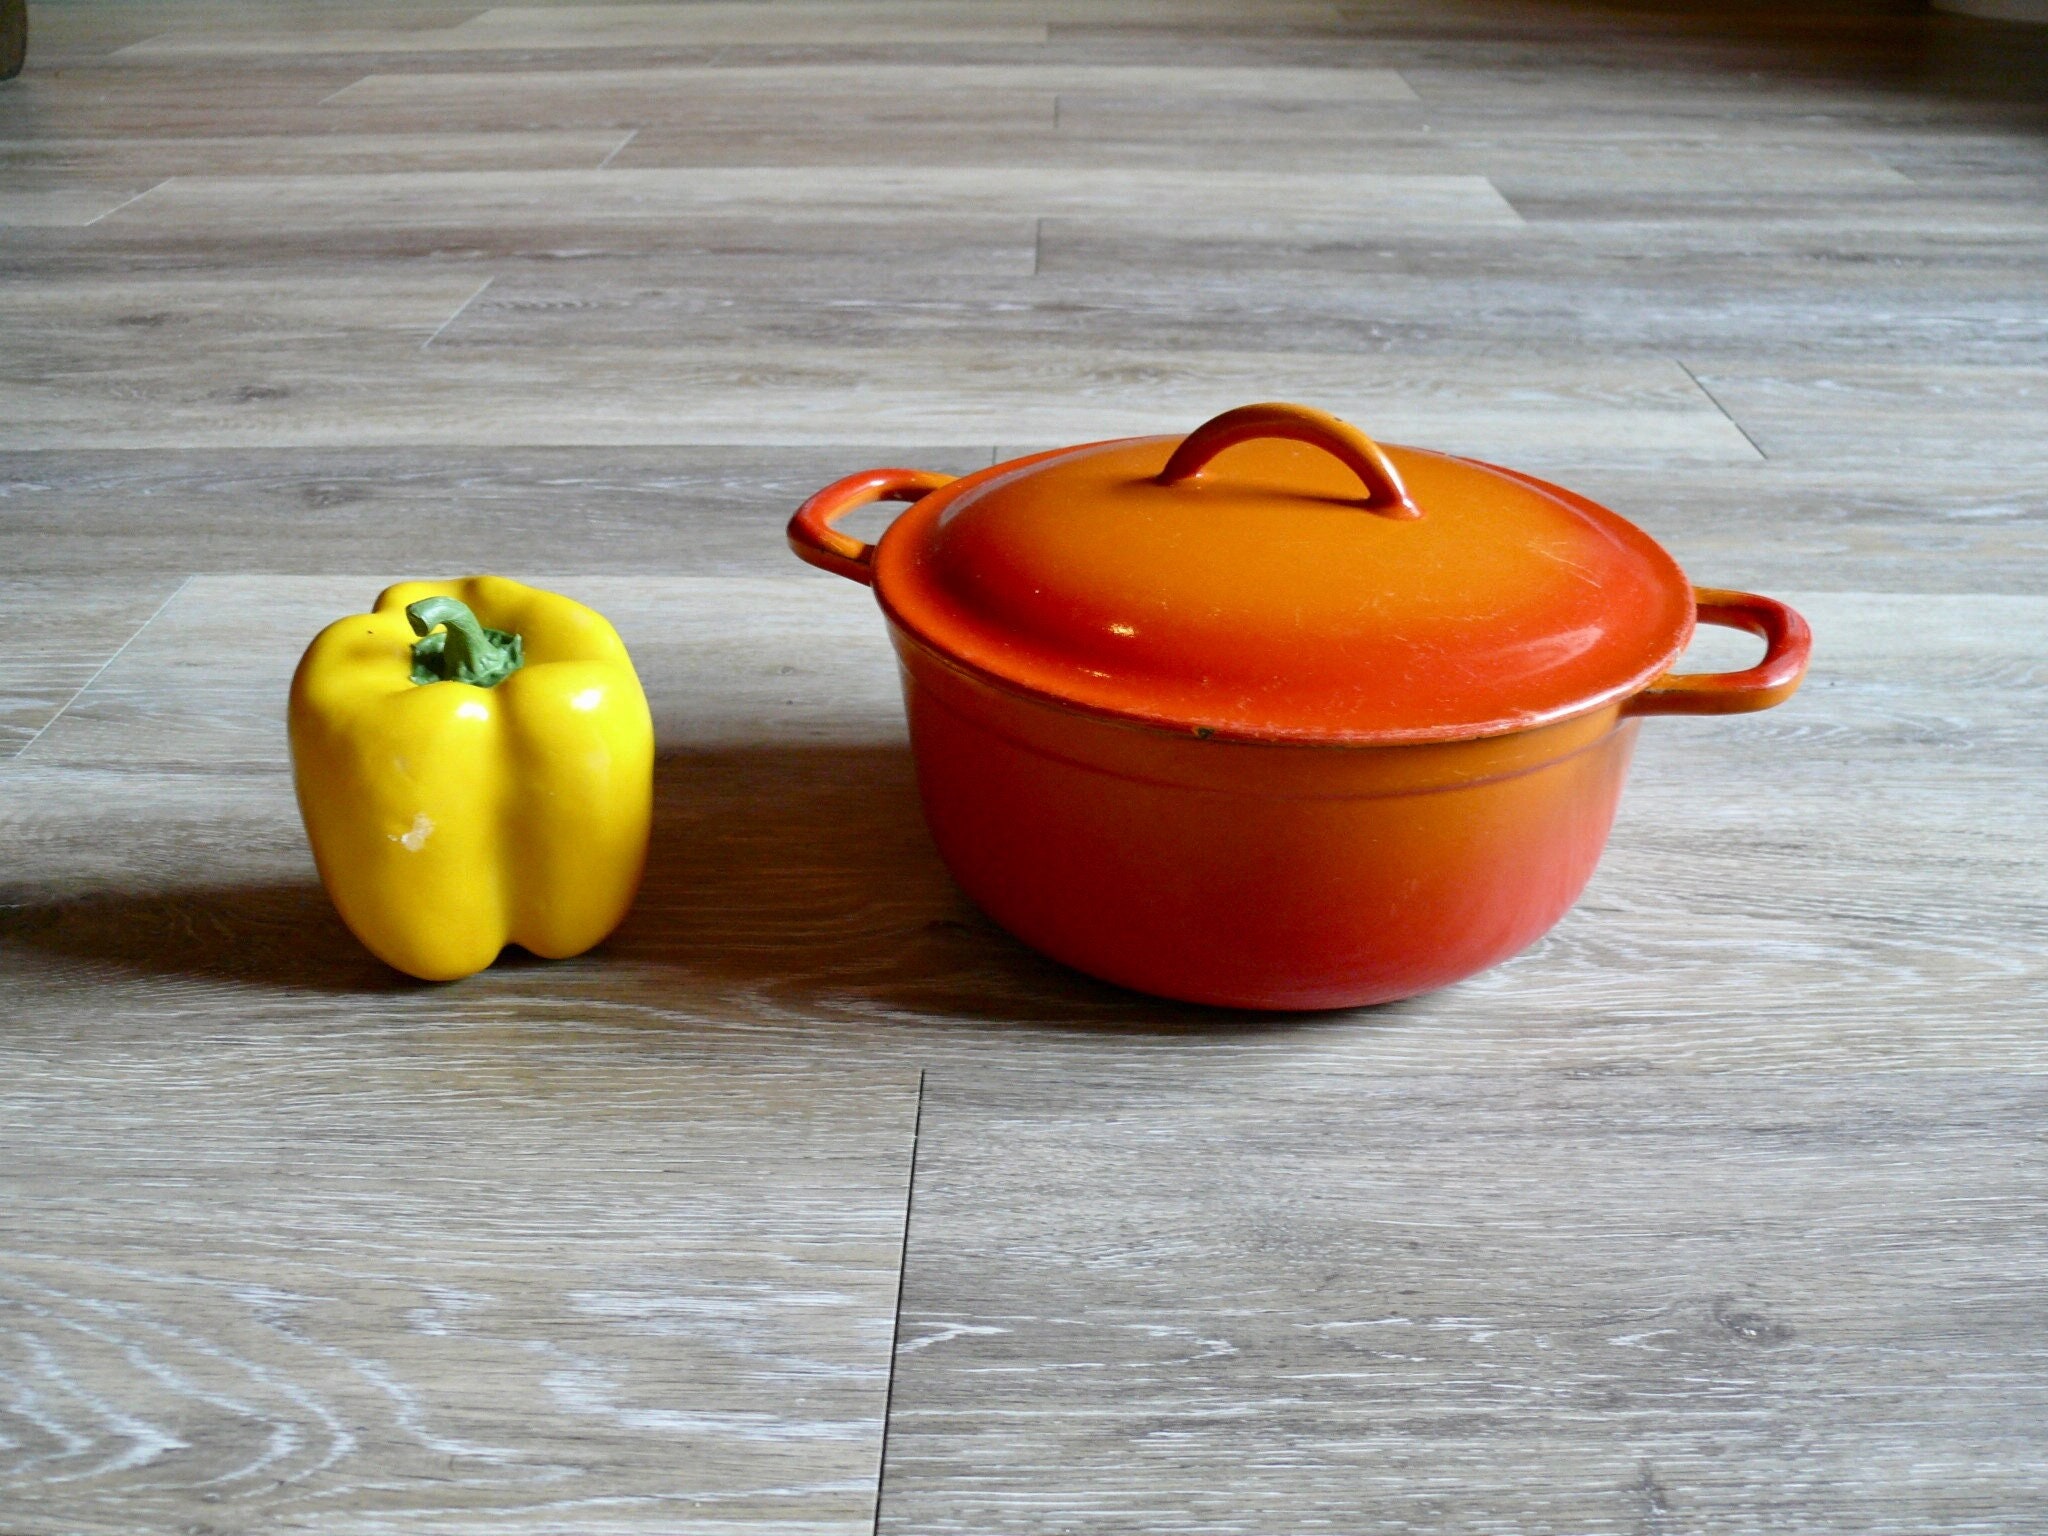 4.5 QT Enamel Dutch Oven - Red - Gift and Gourmet